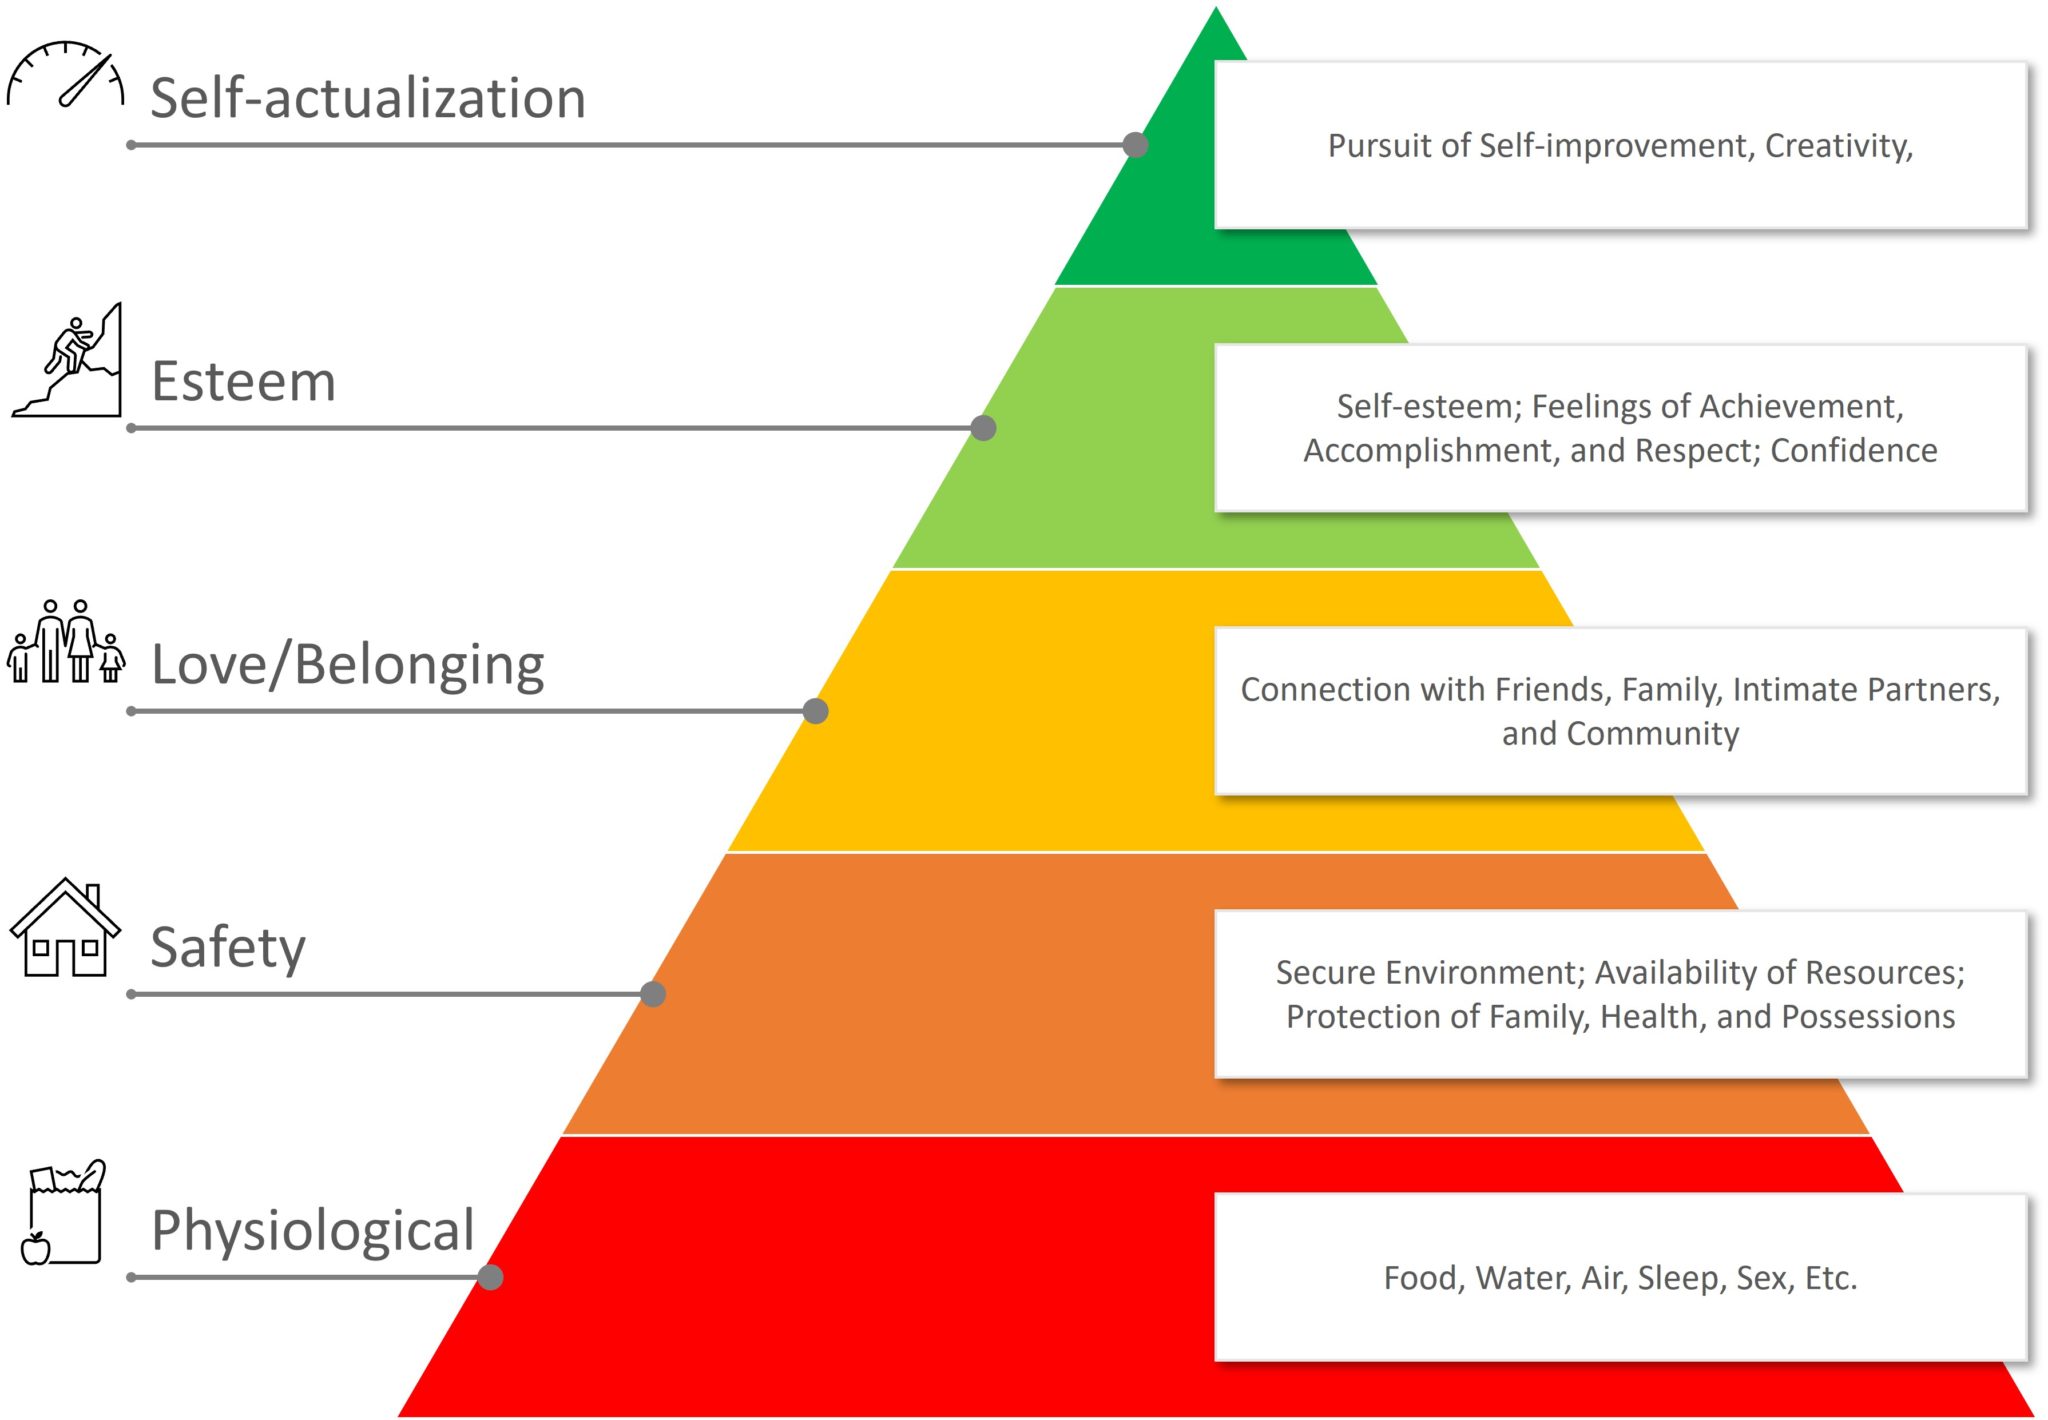 Abraham Maslow's Hierarchy of Human Needs